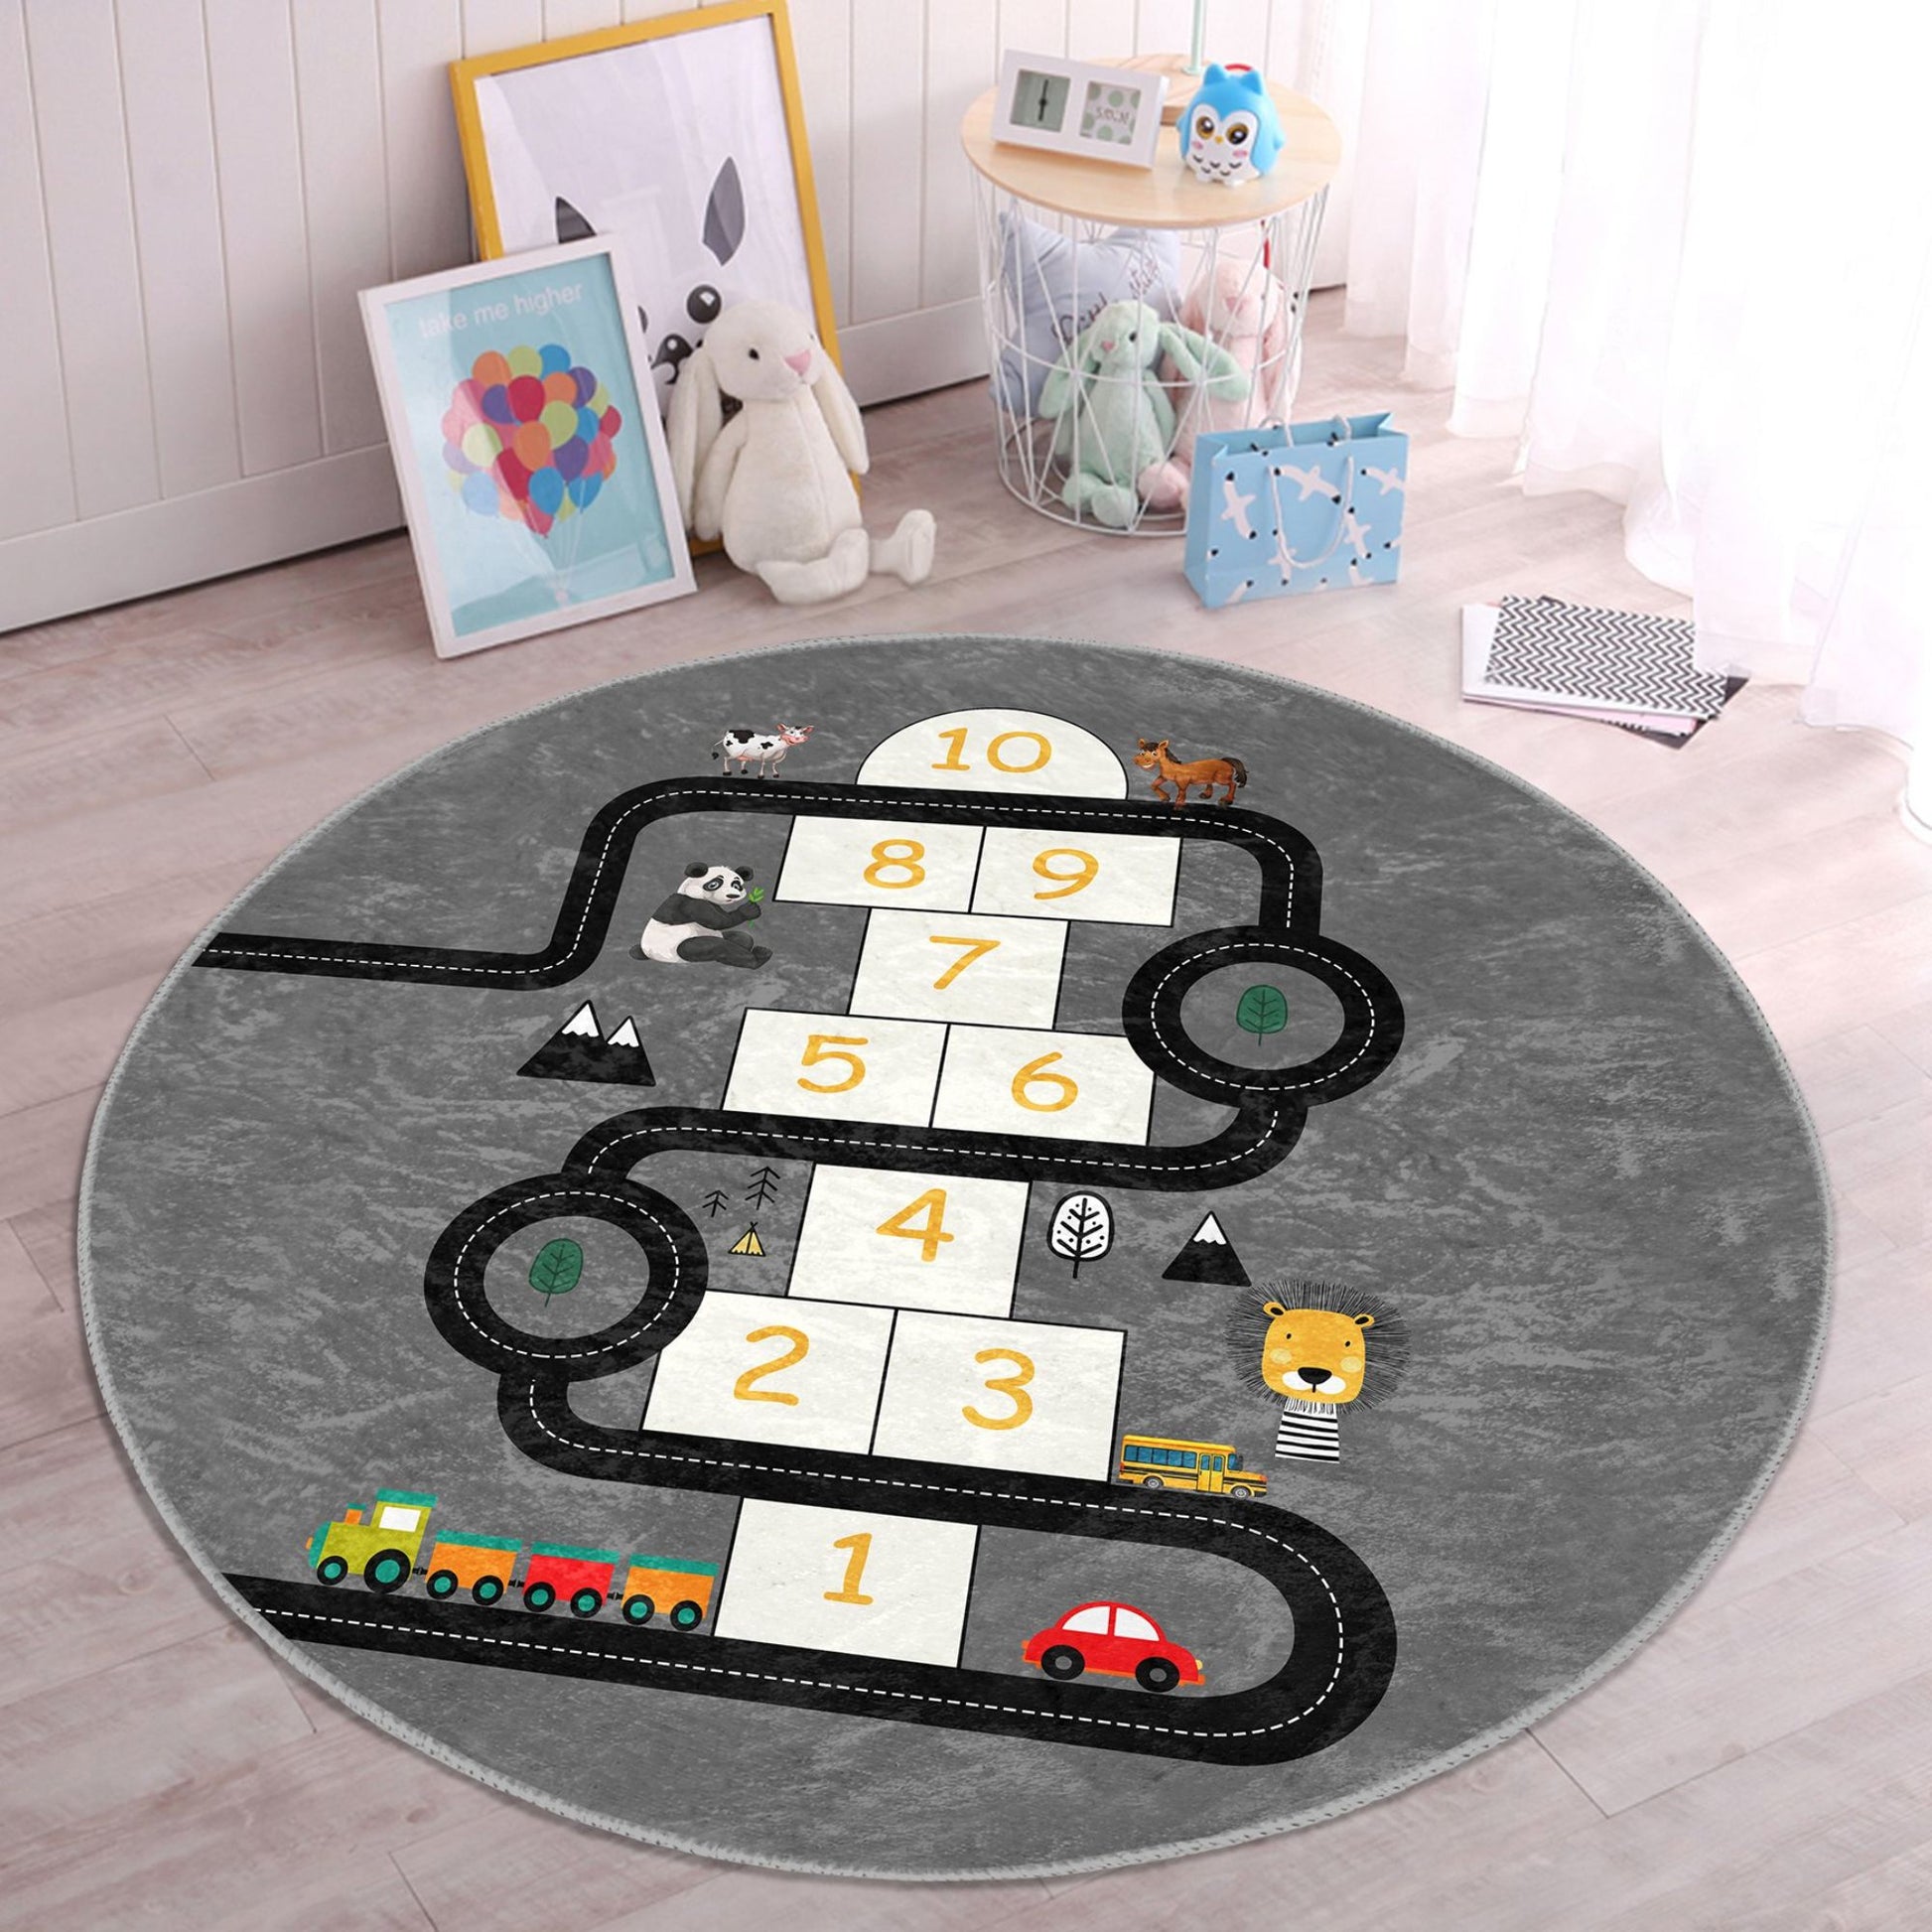 Stylish Printed Rug with Train Game Pattern